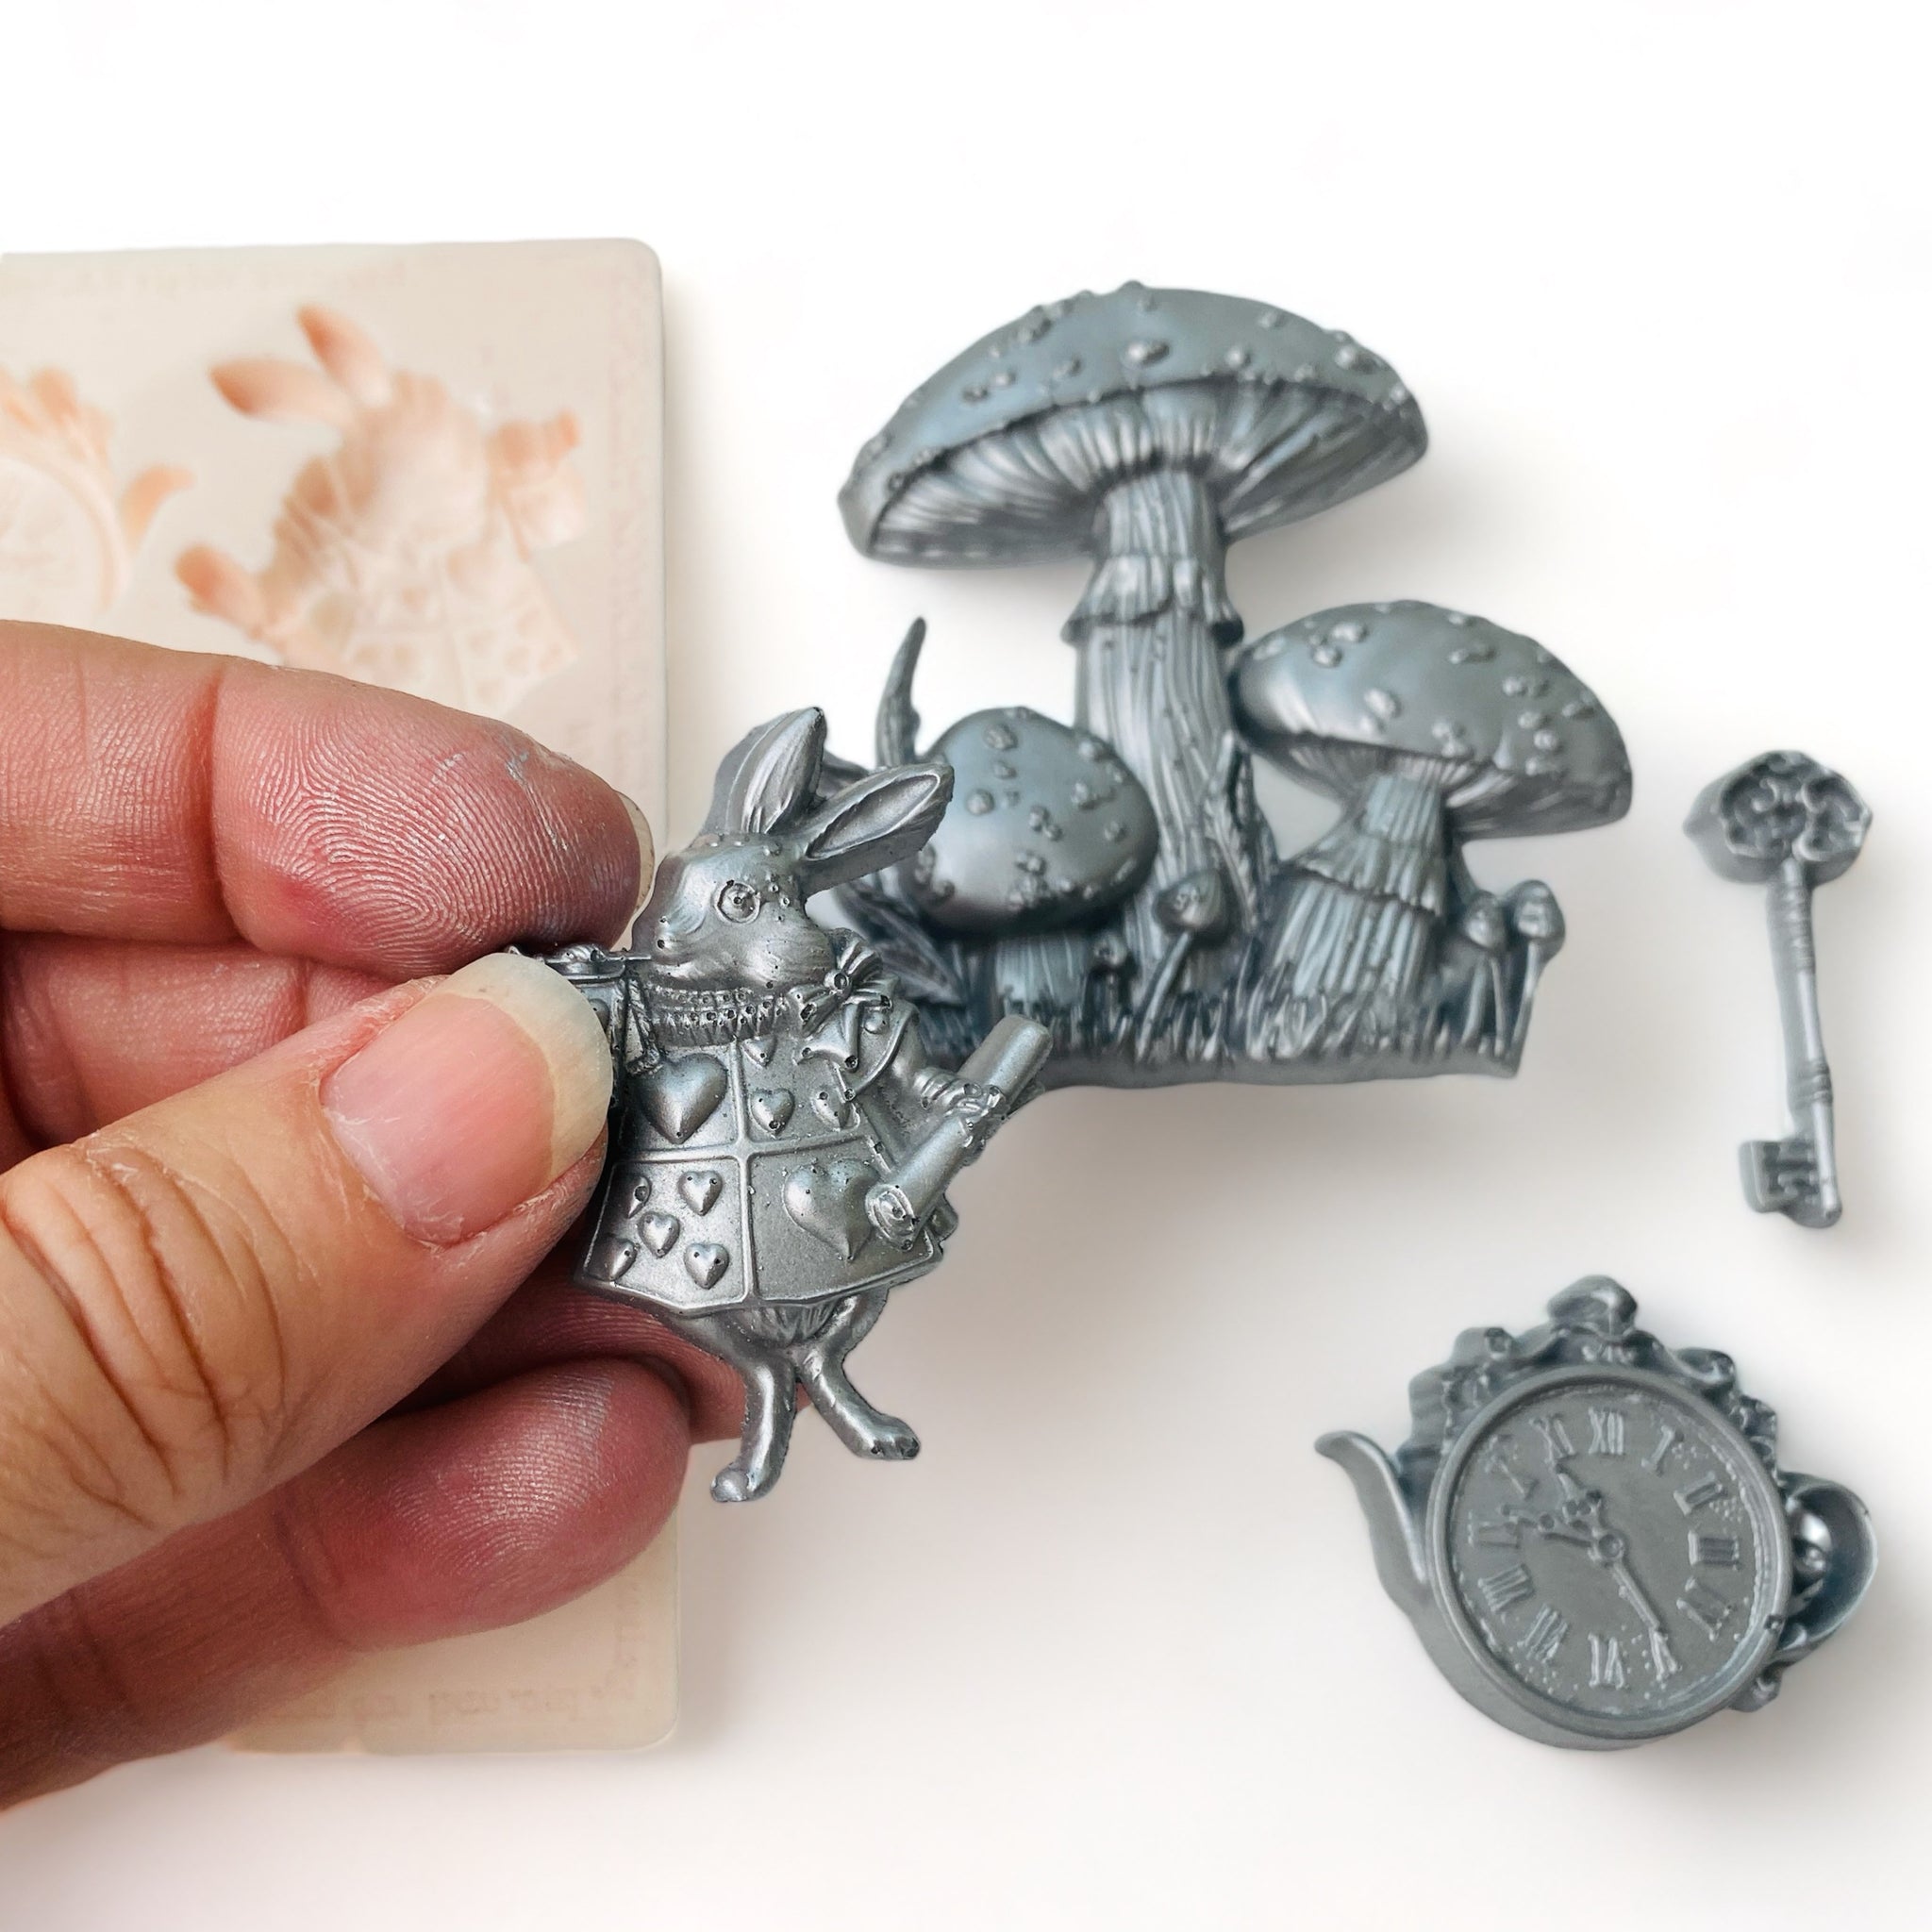 A beige silicone mold and silver colored castings of Alice in Wonderland pieces including a key, teacup clock, mushrooms, and the White Rabbit are against a white background. A hand is holding the White Rabbit casting.